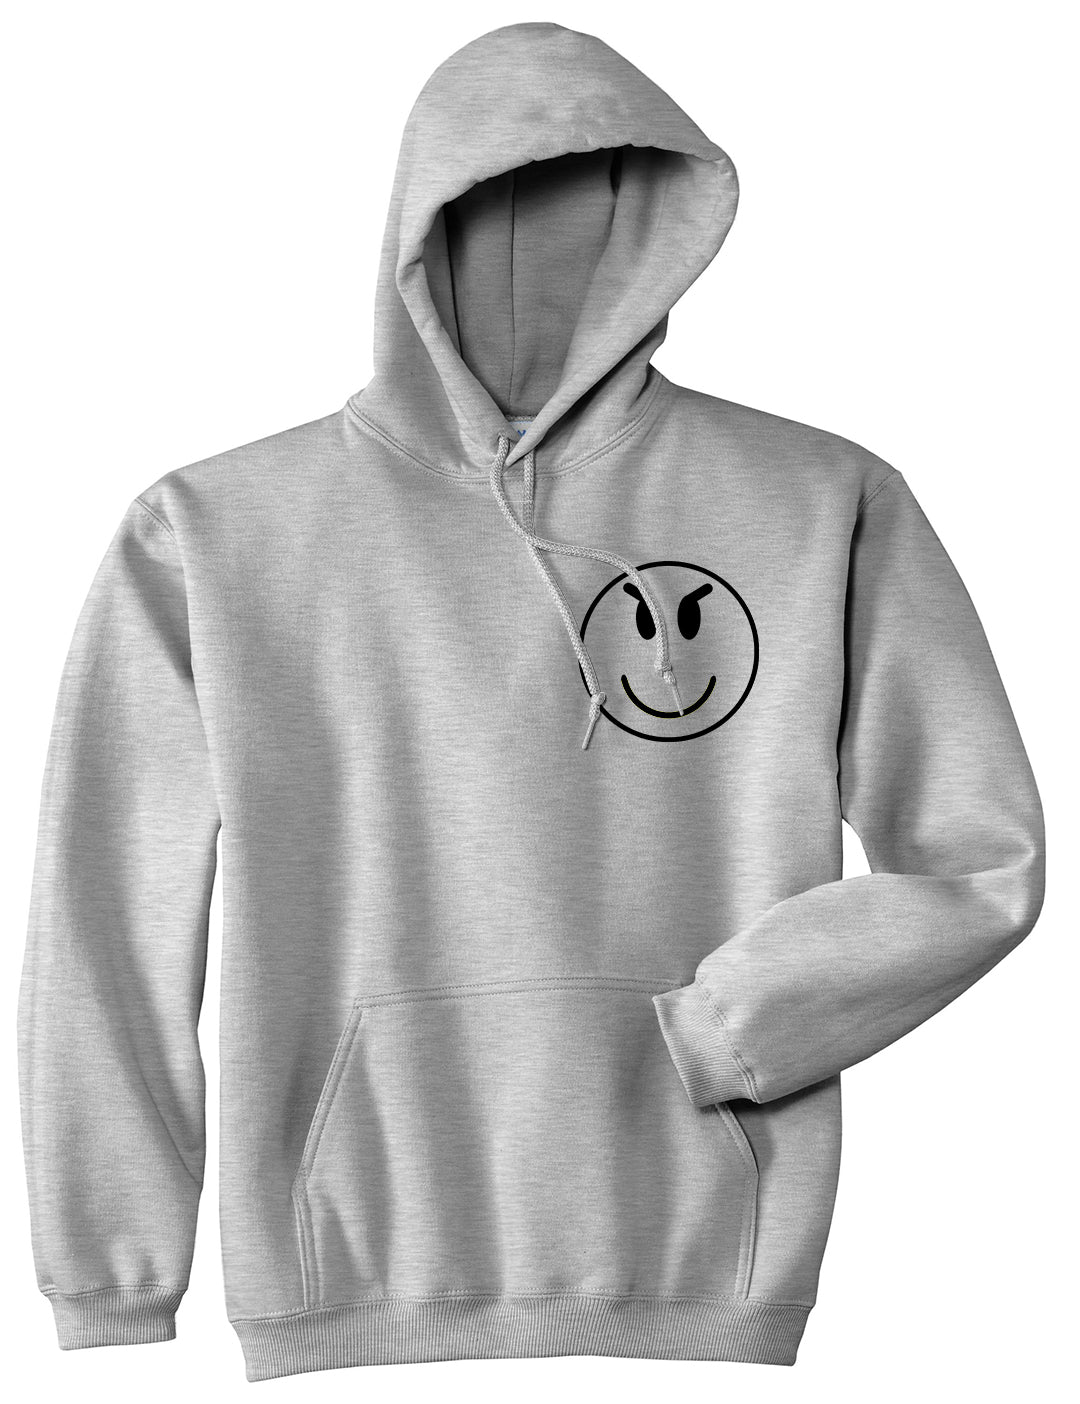 Evil Face Emoji Chest Mens Grey Pullover Hoodie by KINGS OF NY